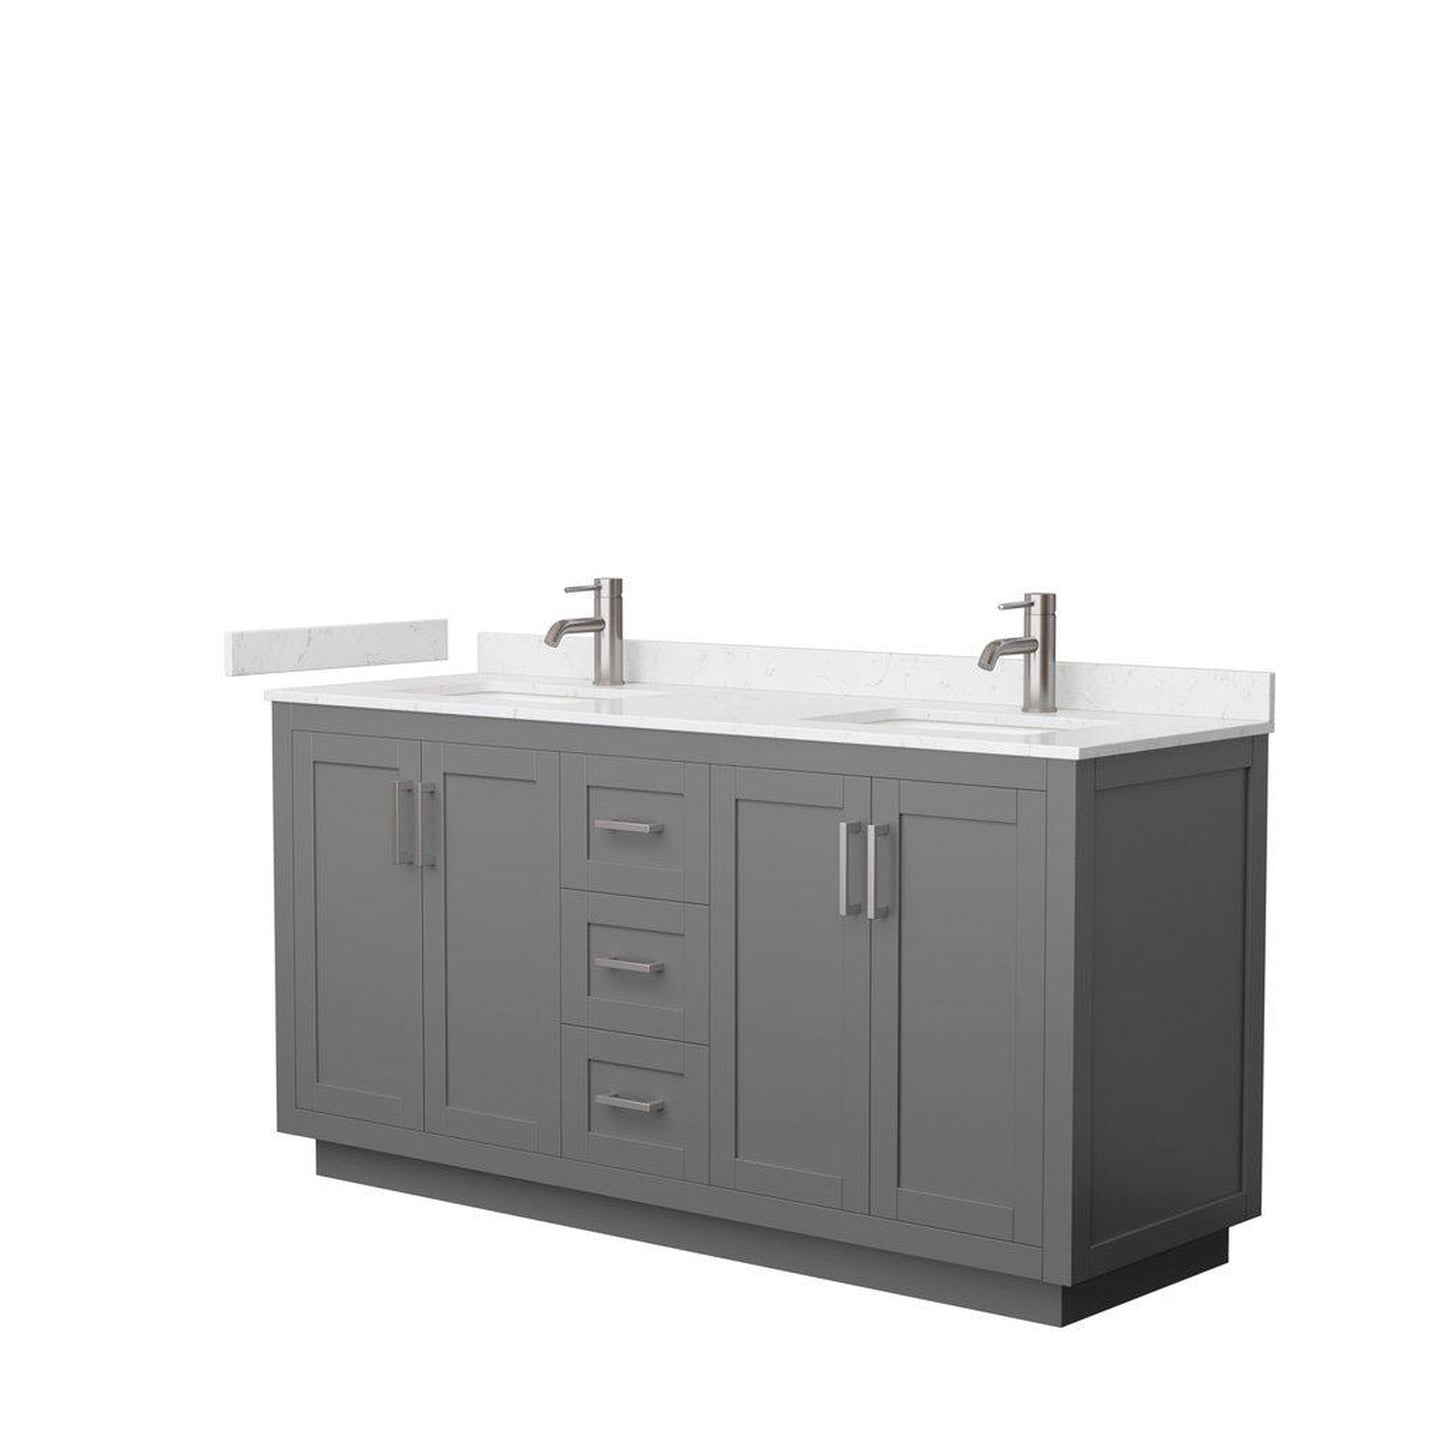 Wyndham Collection Miranda 66" Double Bathroom Dark Gray Vanity Set With Light-Vein Carrara Cultured Marble Countertop, Undermount Square Sink, And Brushed Nickel Trim